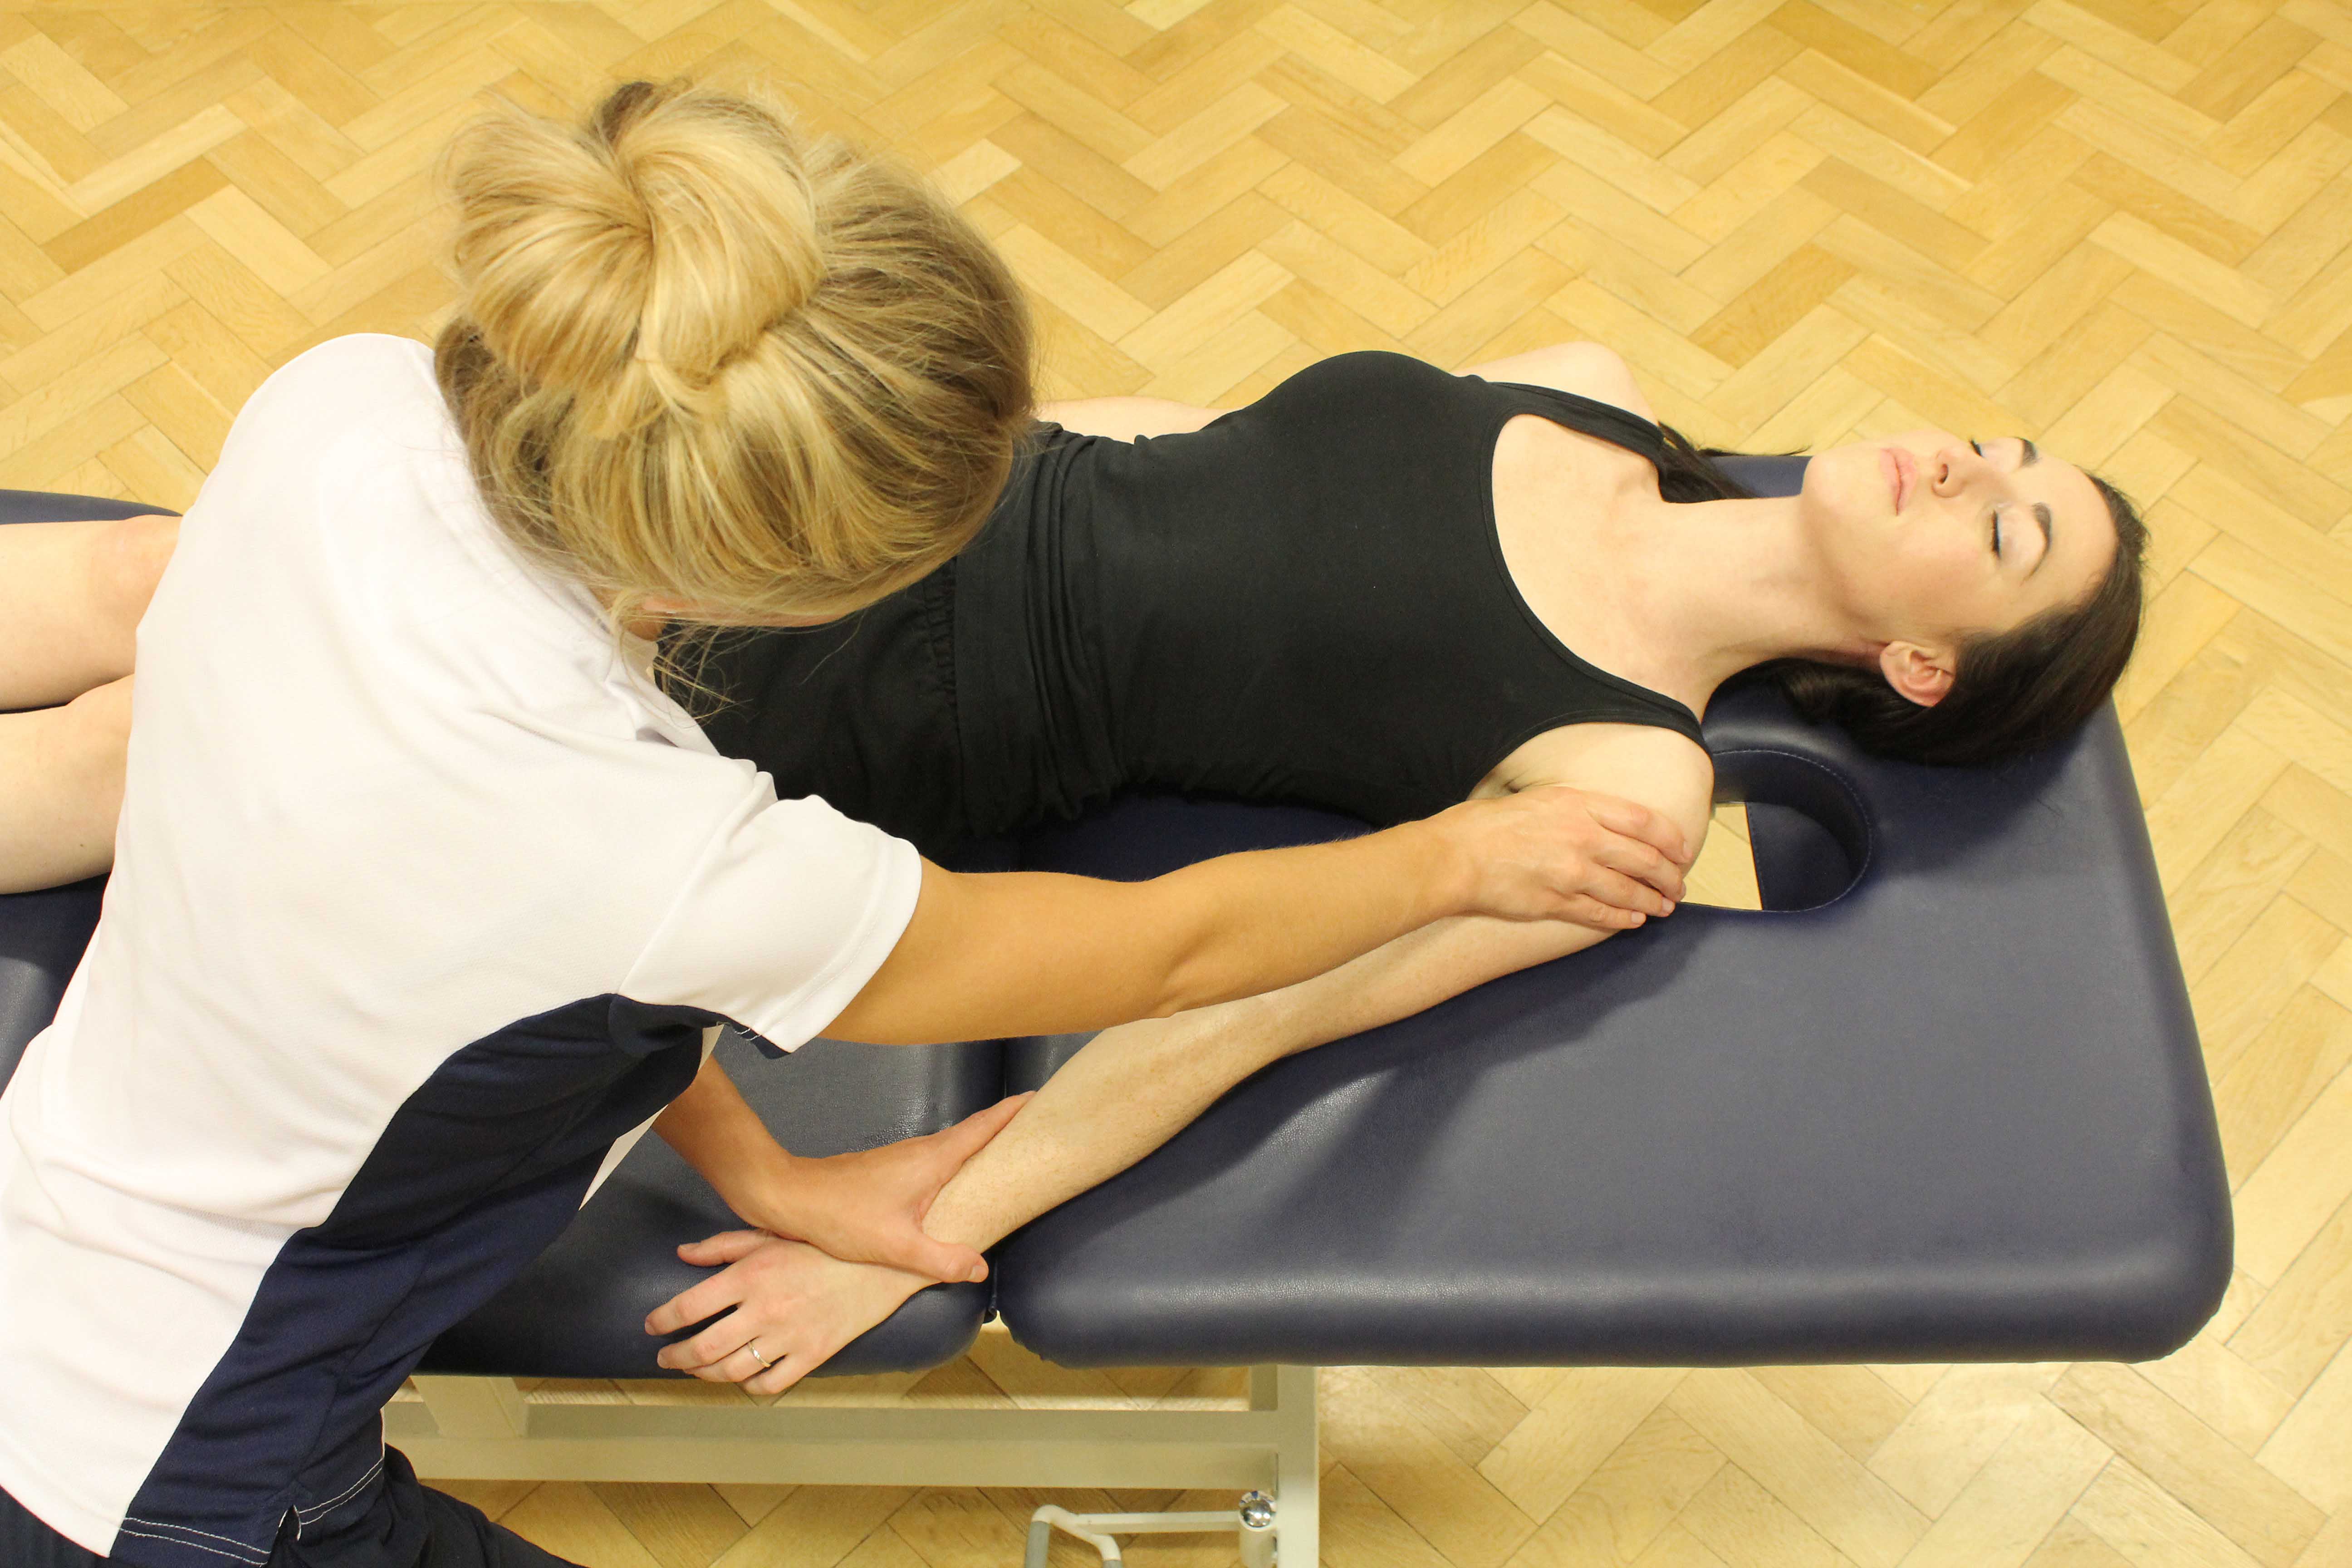 Soft tissue massage of the biceps and deltoids of the upper arm